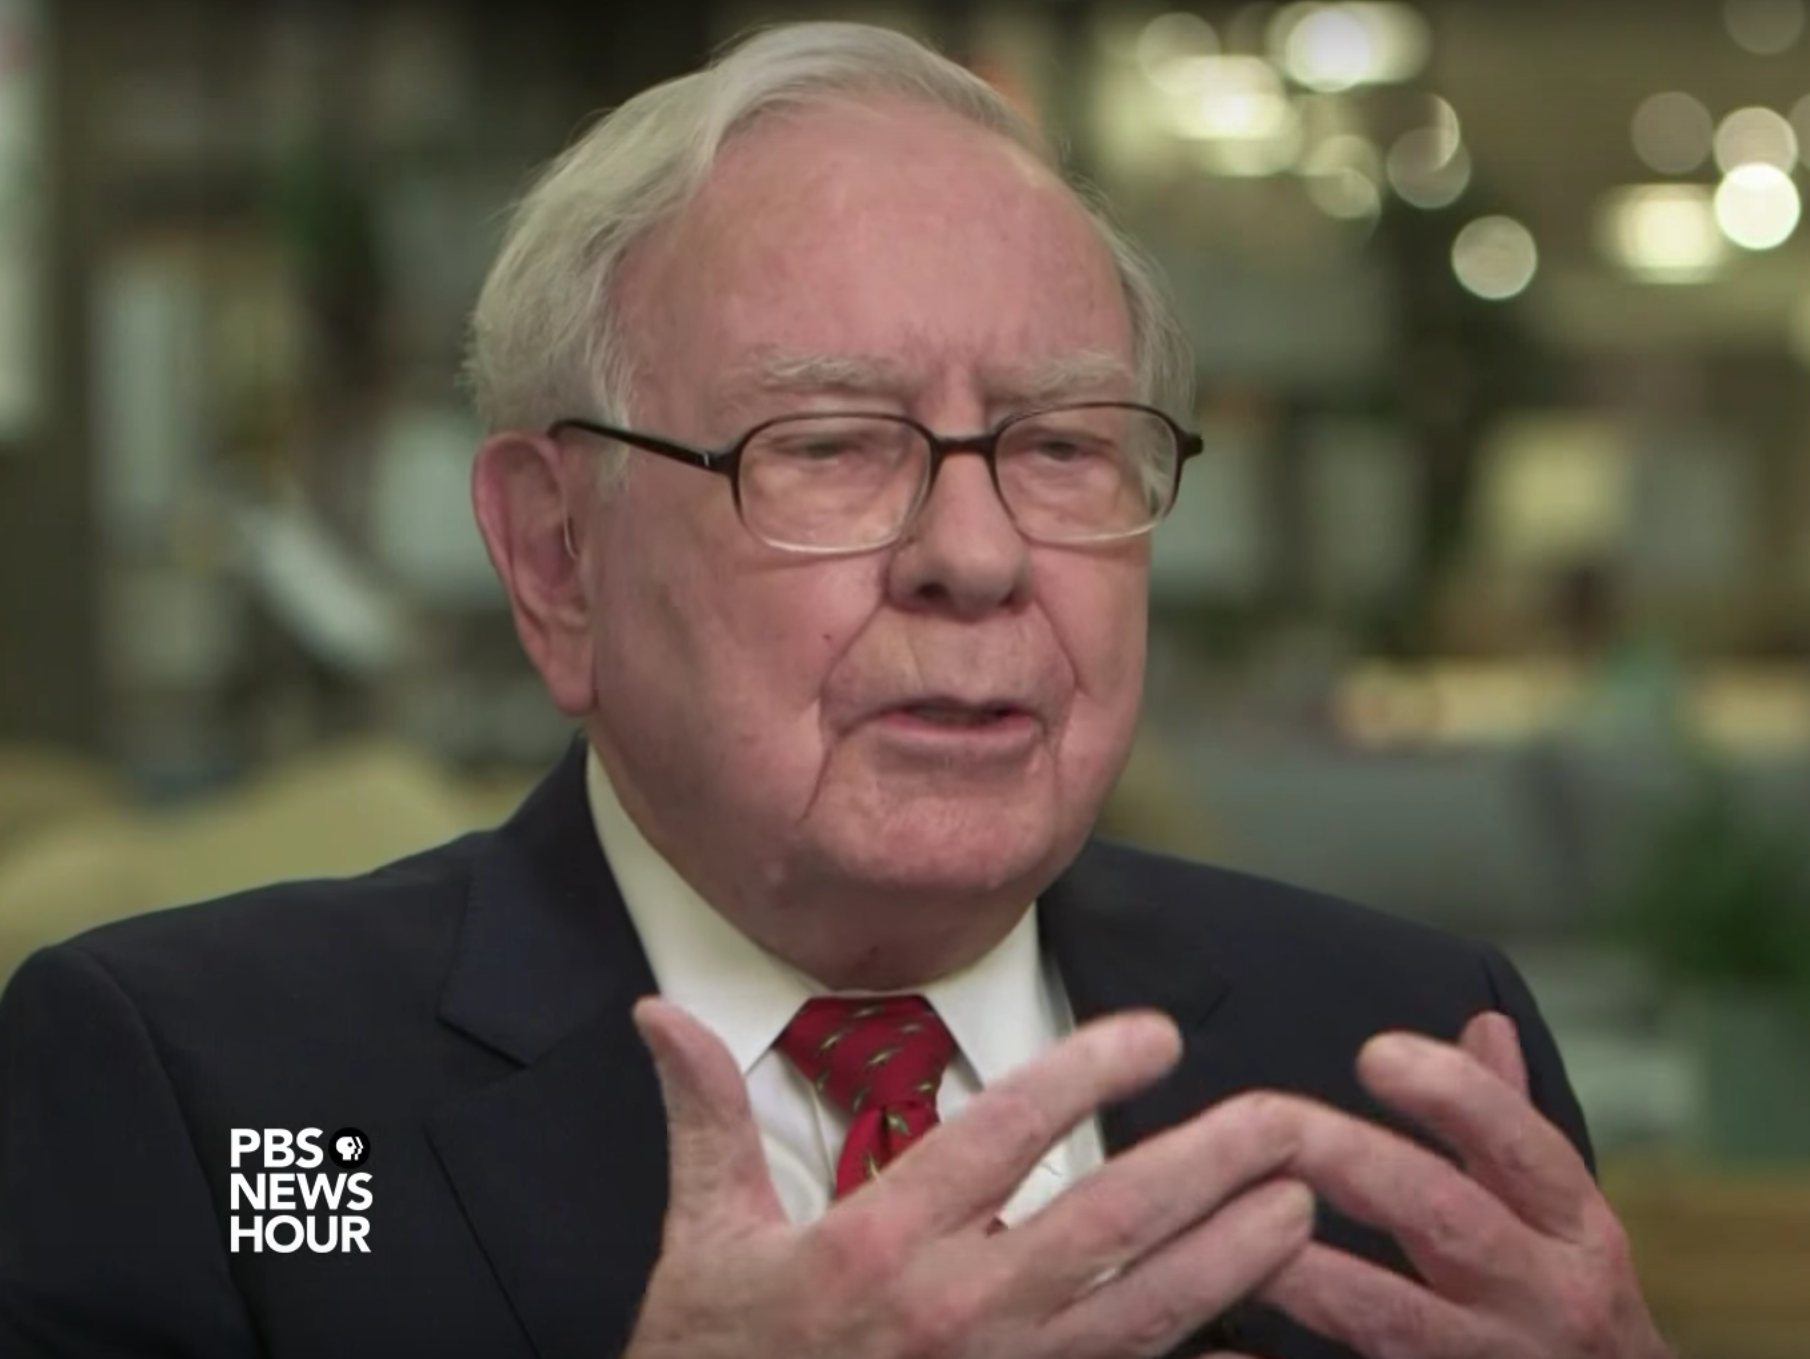 'We have a lot of businesses... I don’t think any of them are non-competitive in the world because of the corporate tax rate,' Mr Buffett said